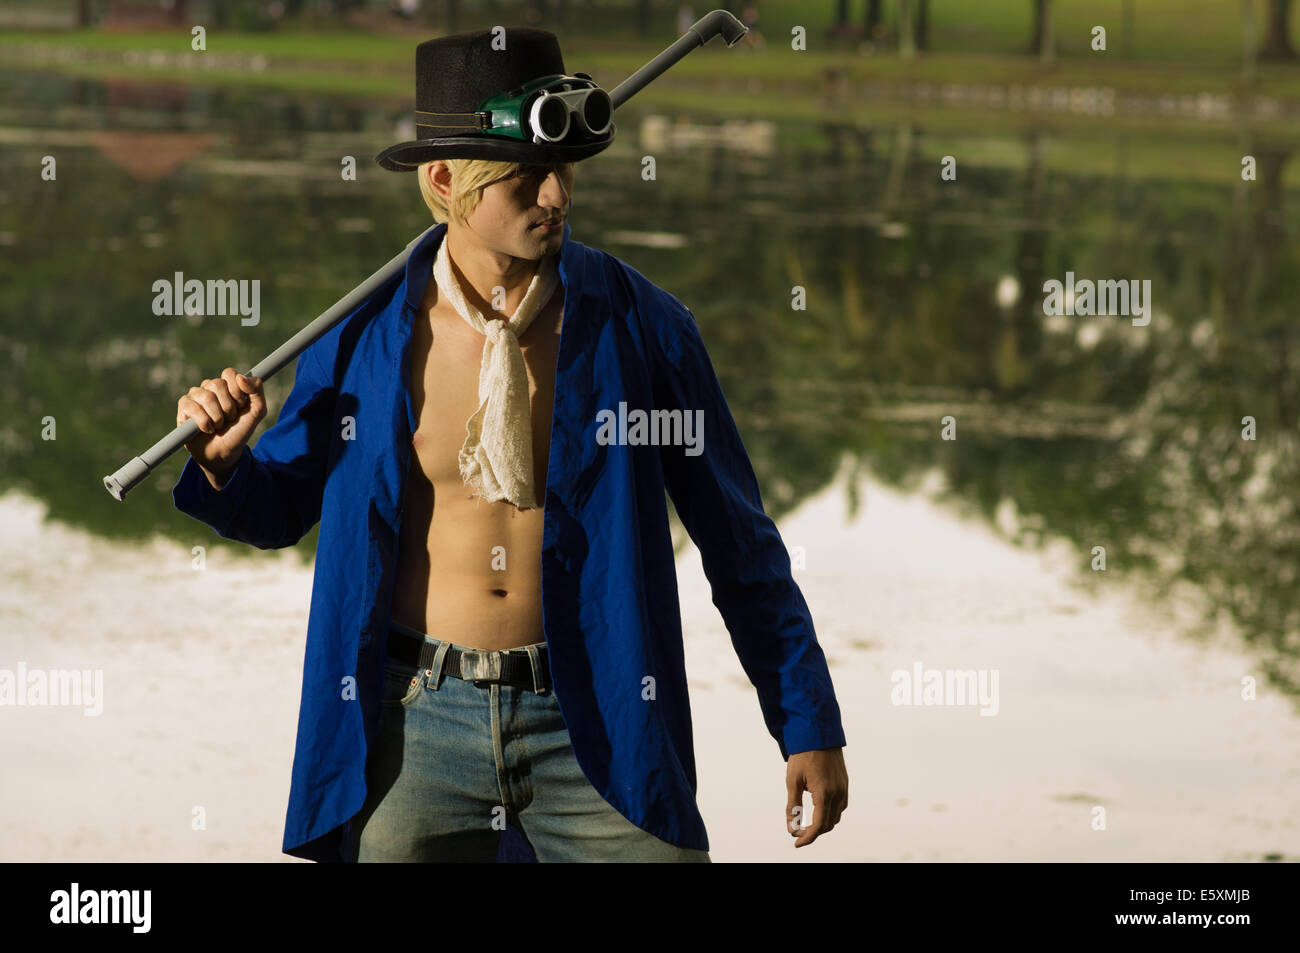 A Cosplayer Cosplaying As Sabo From One Piece Stock Photo Alamy